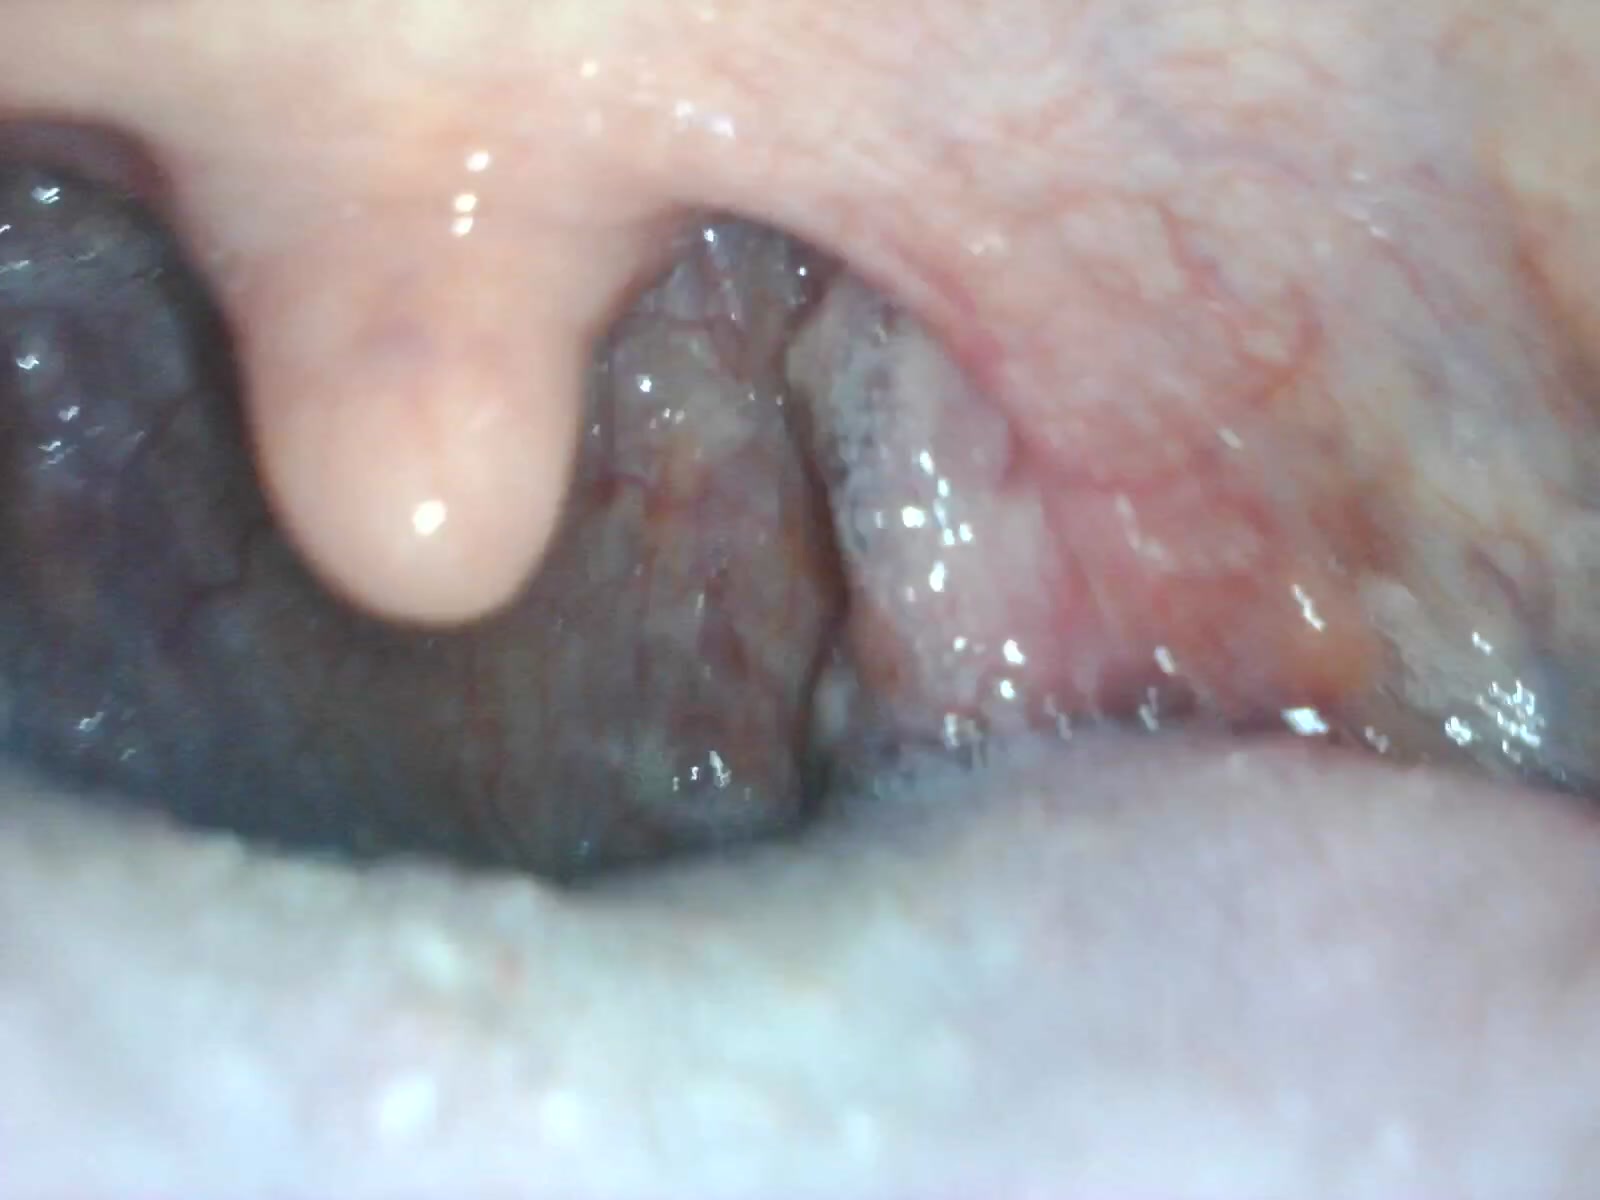 Inside of a man mouth